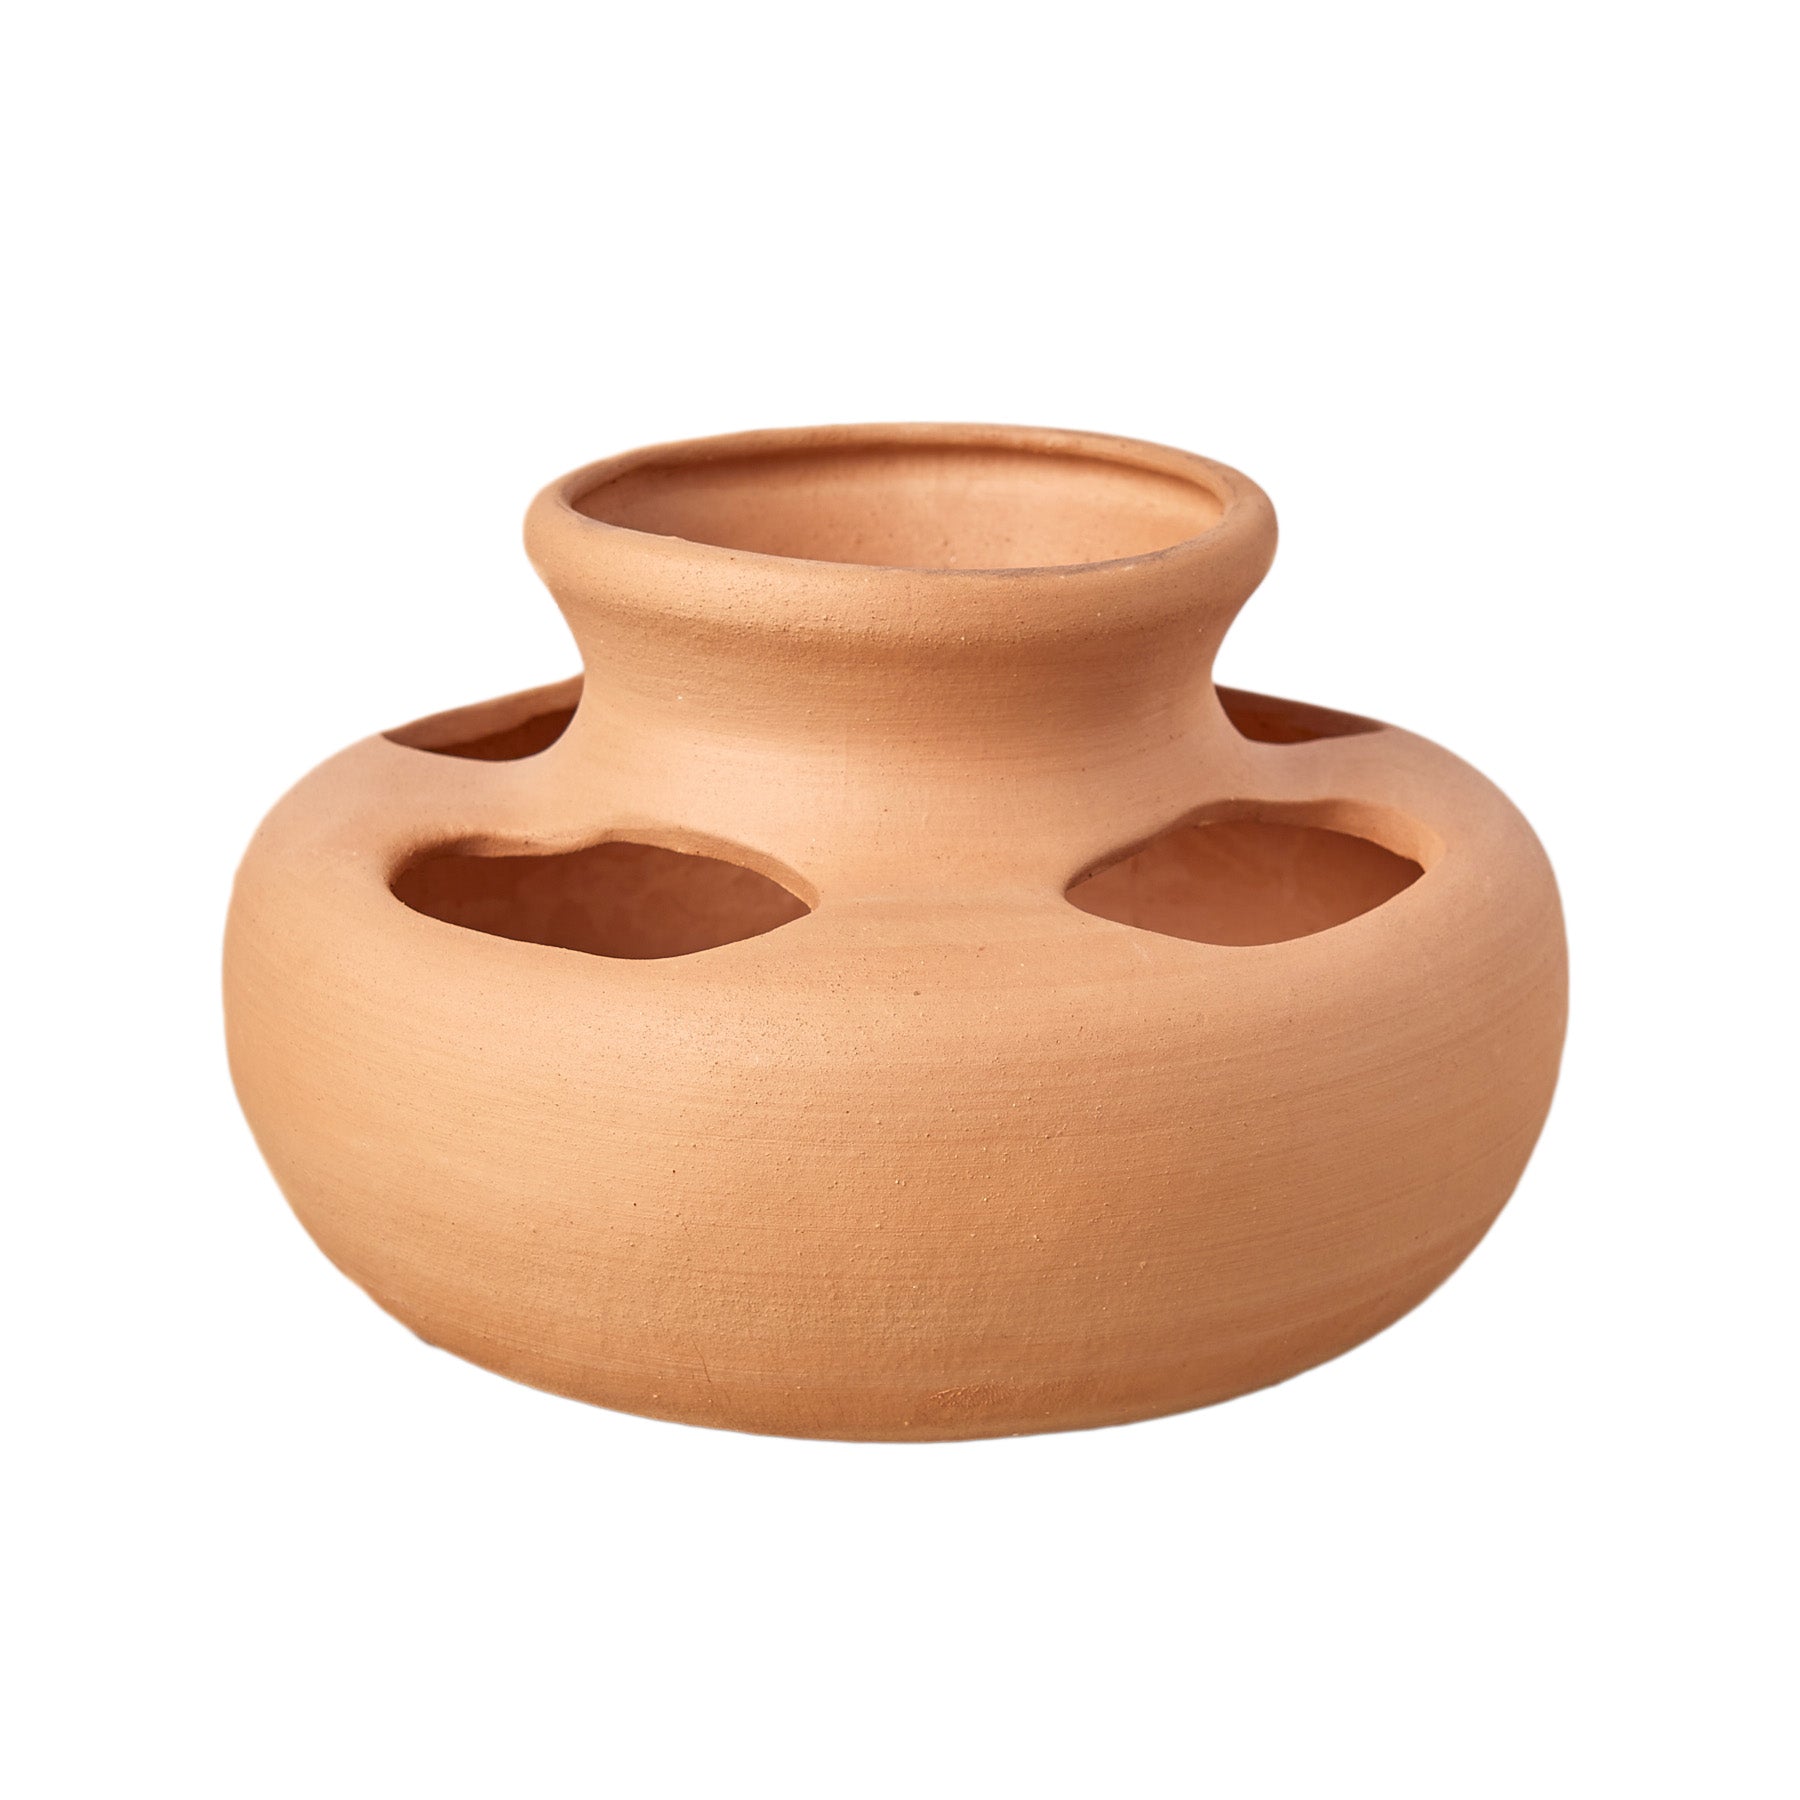 A small clay pot with a hole in the middle, perfect for your gardening needs at the best garden center near me.